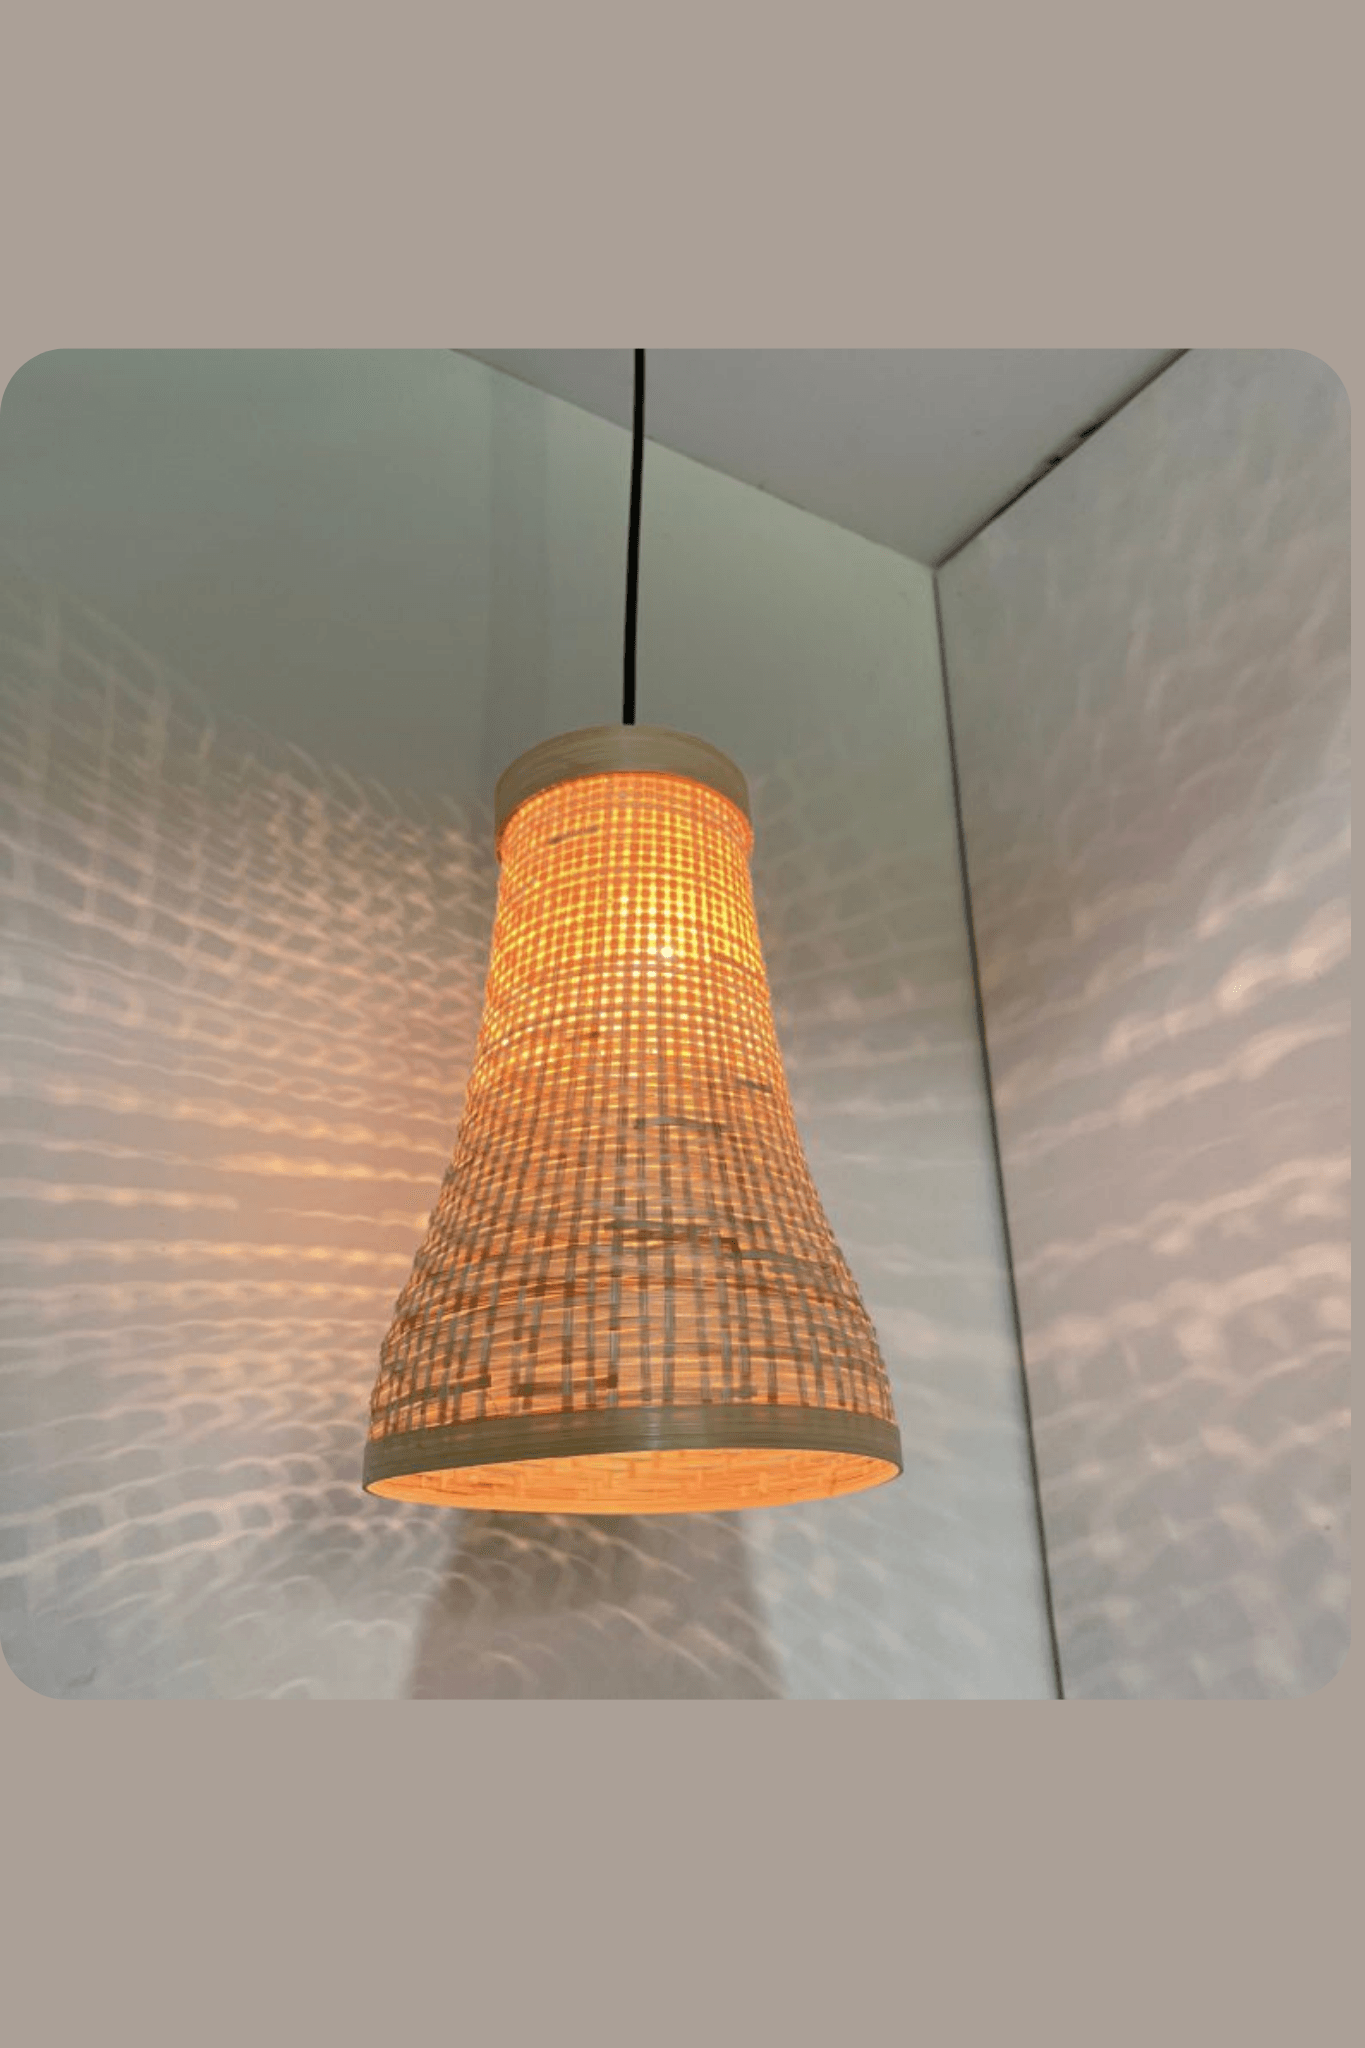 Rylon Handcrafted Pendant Light by The Light Library